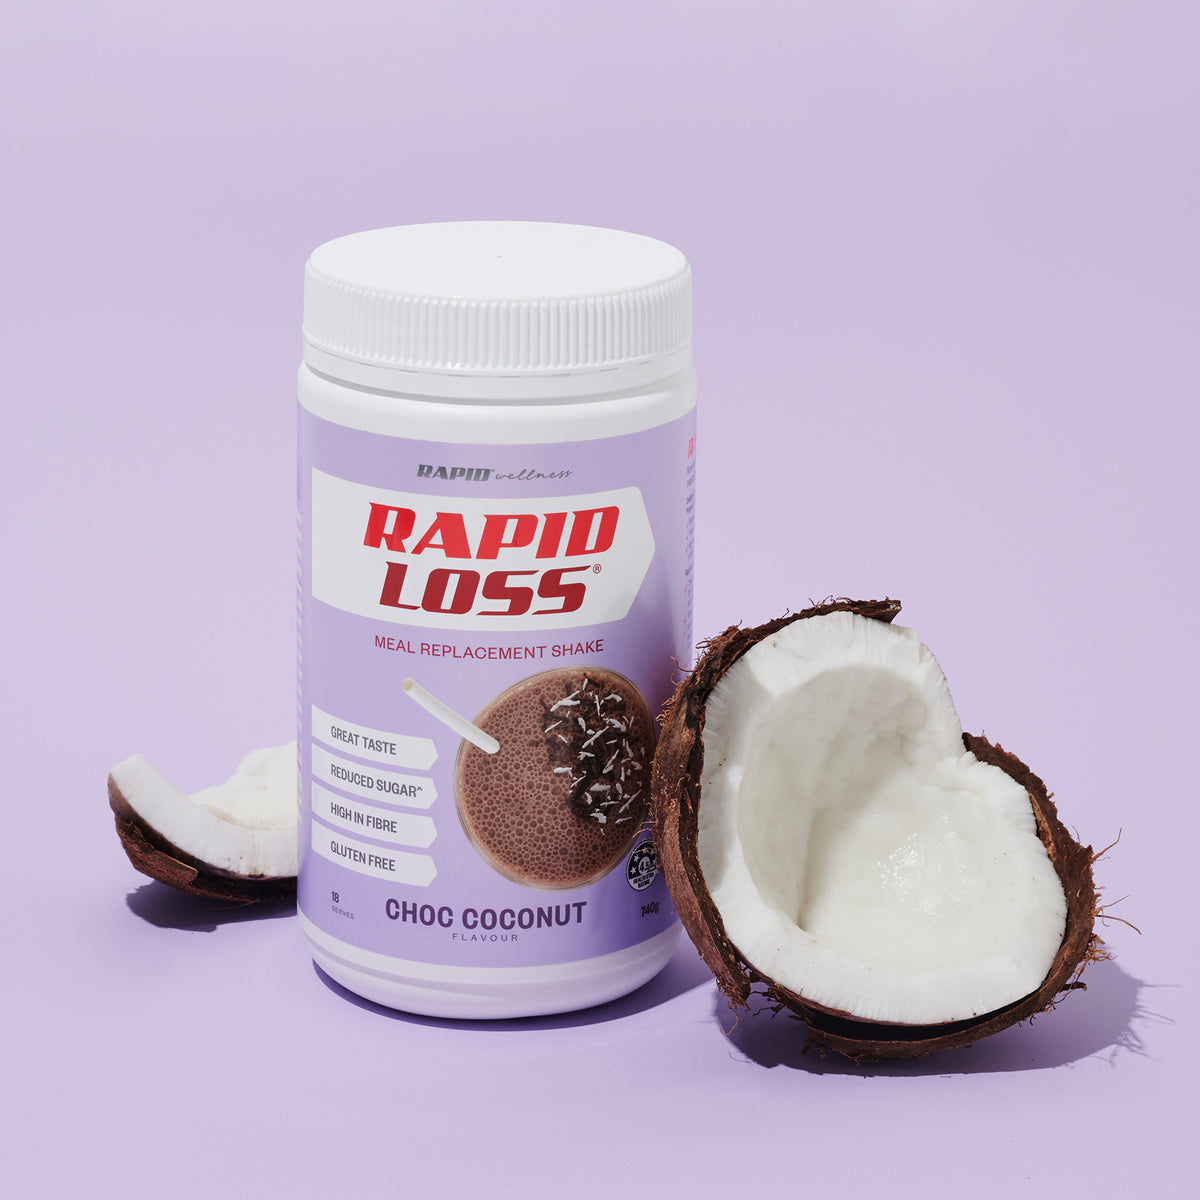 Choc Coconut Meal Replacement Shake 740g